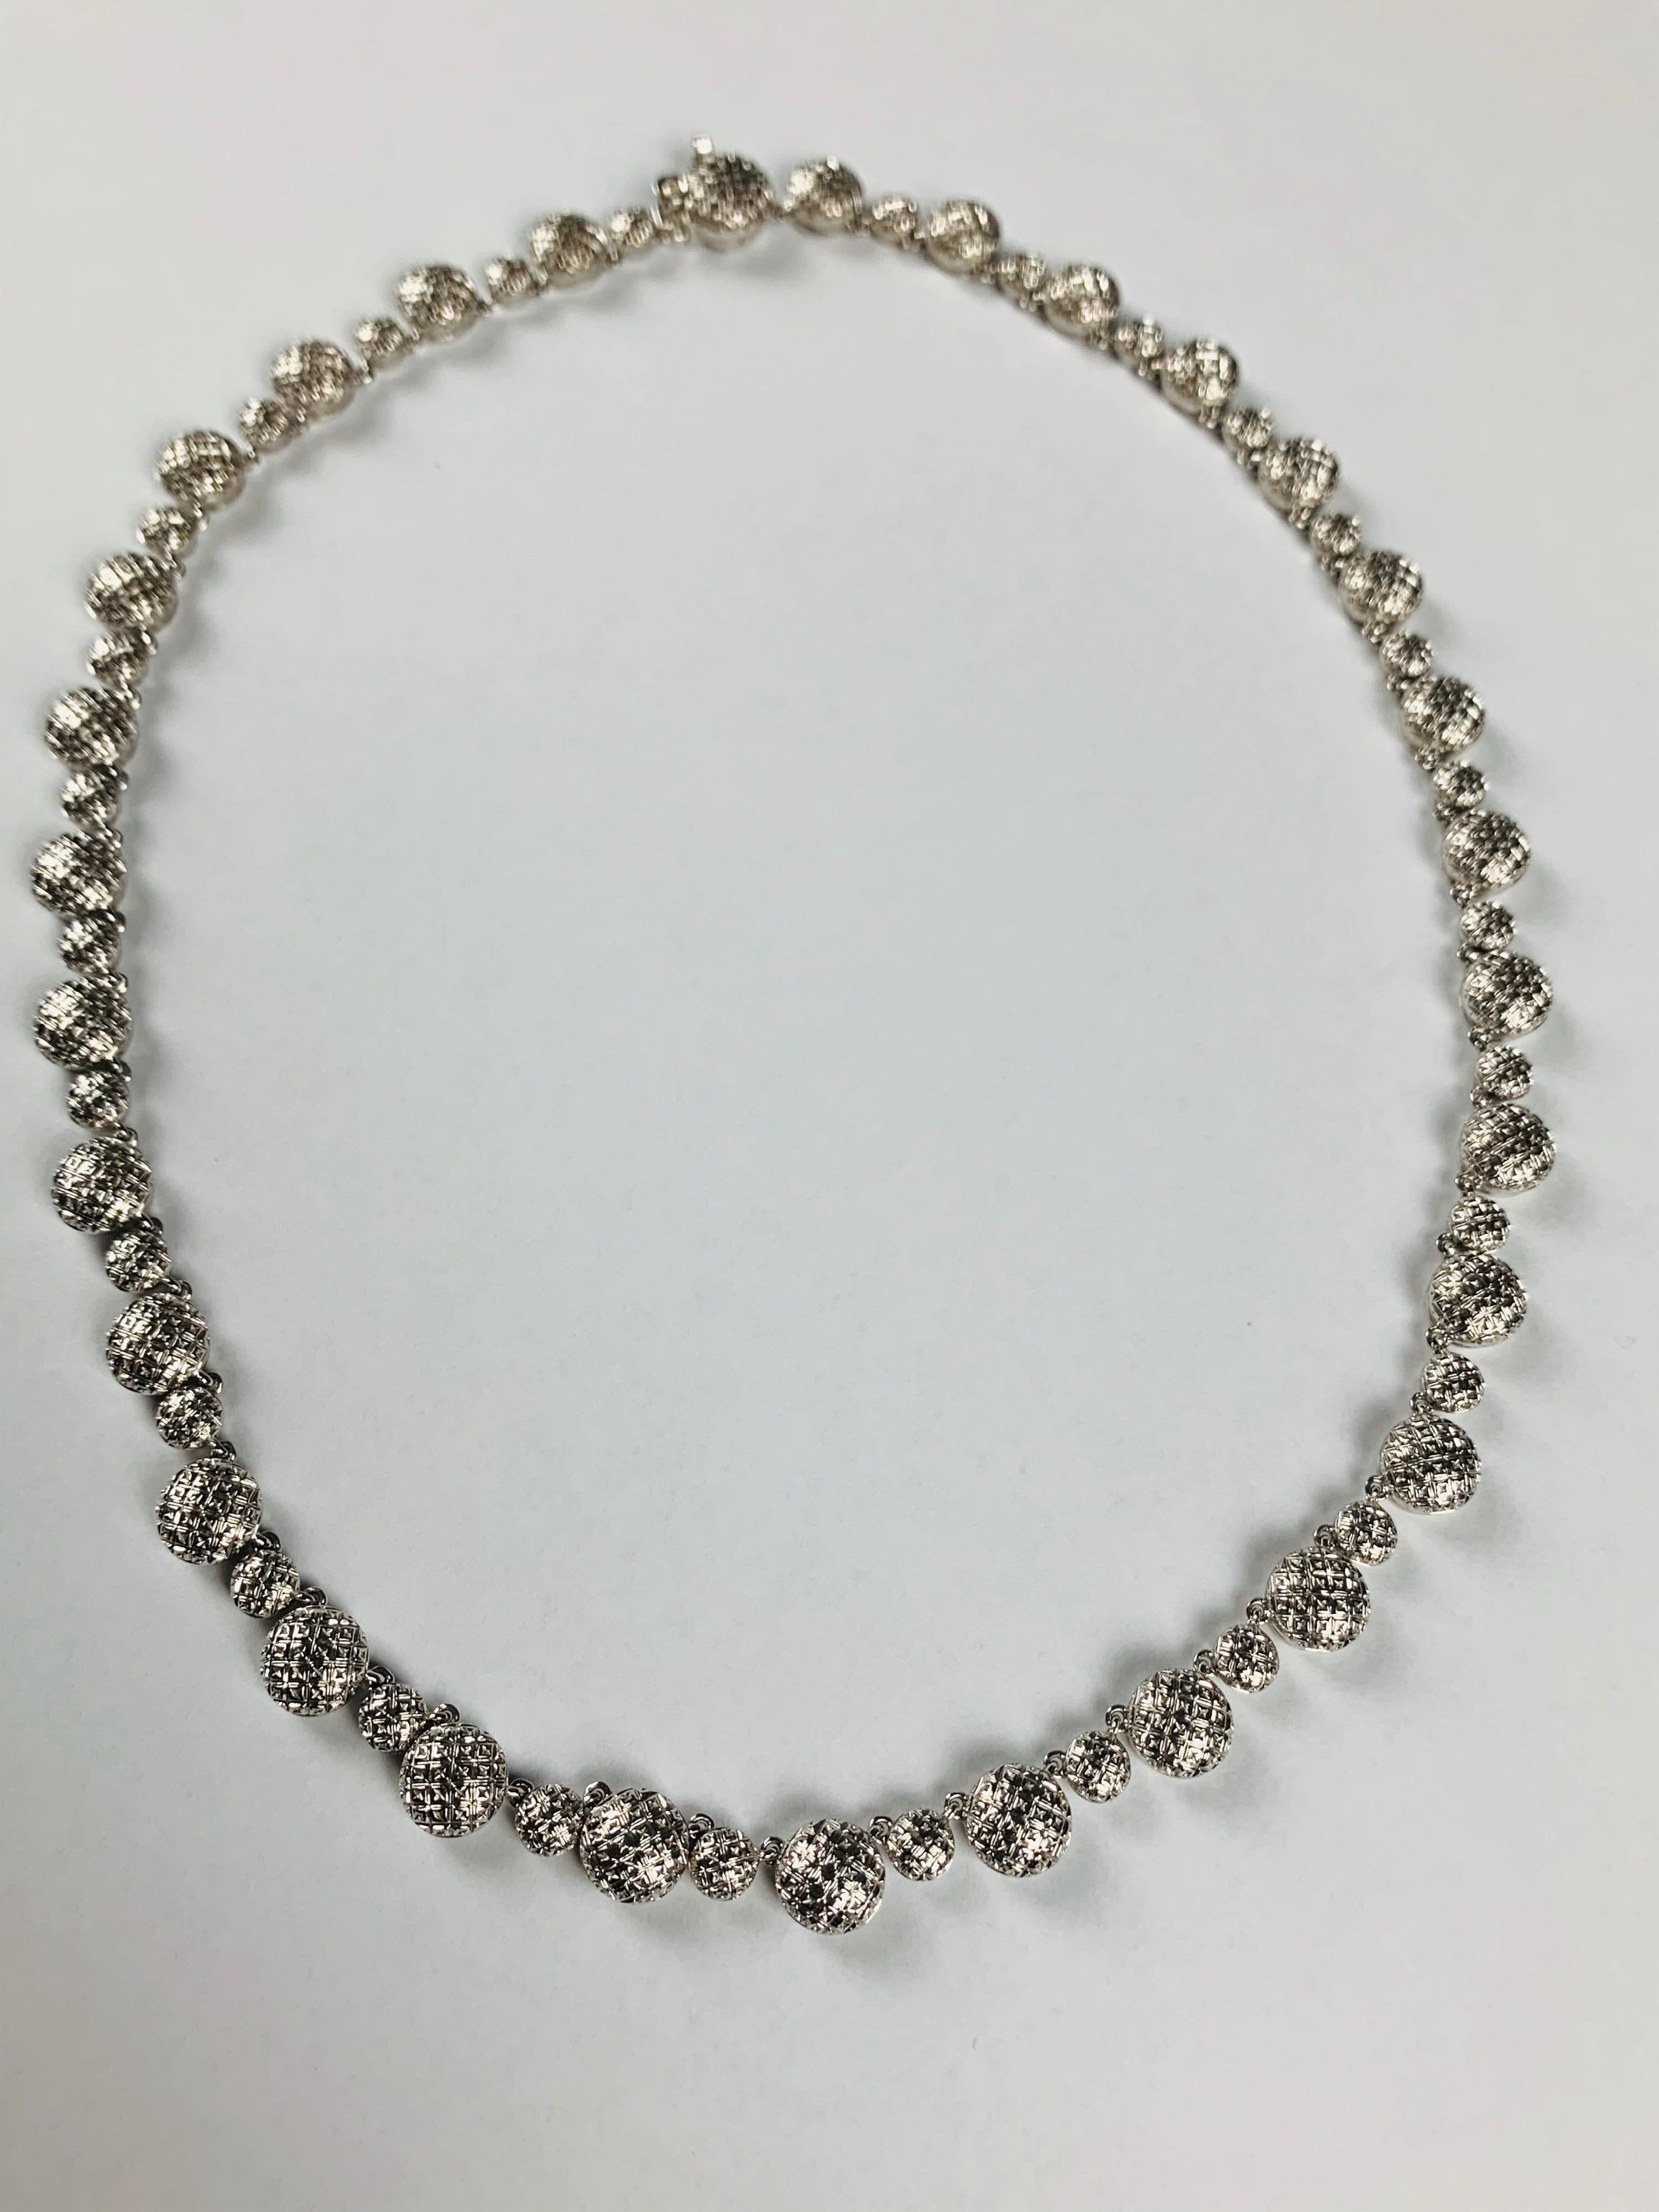 White Gold Decorative Chantecler Necklace For Sale 8